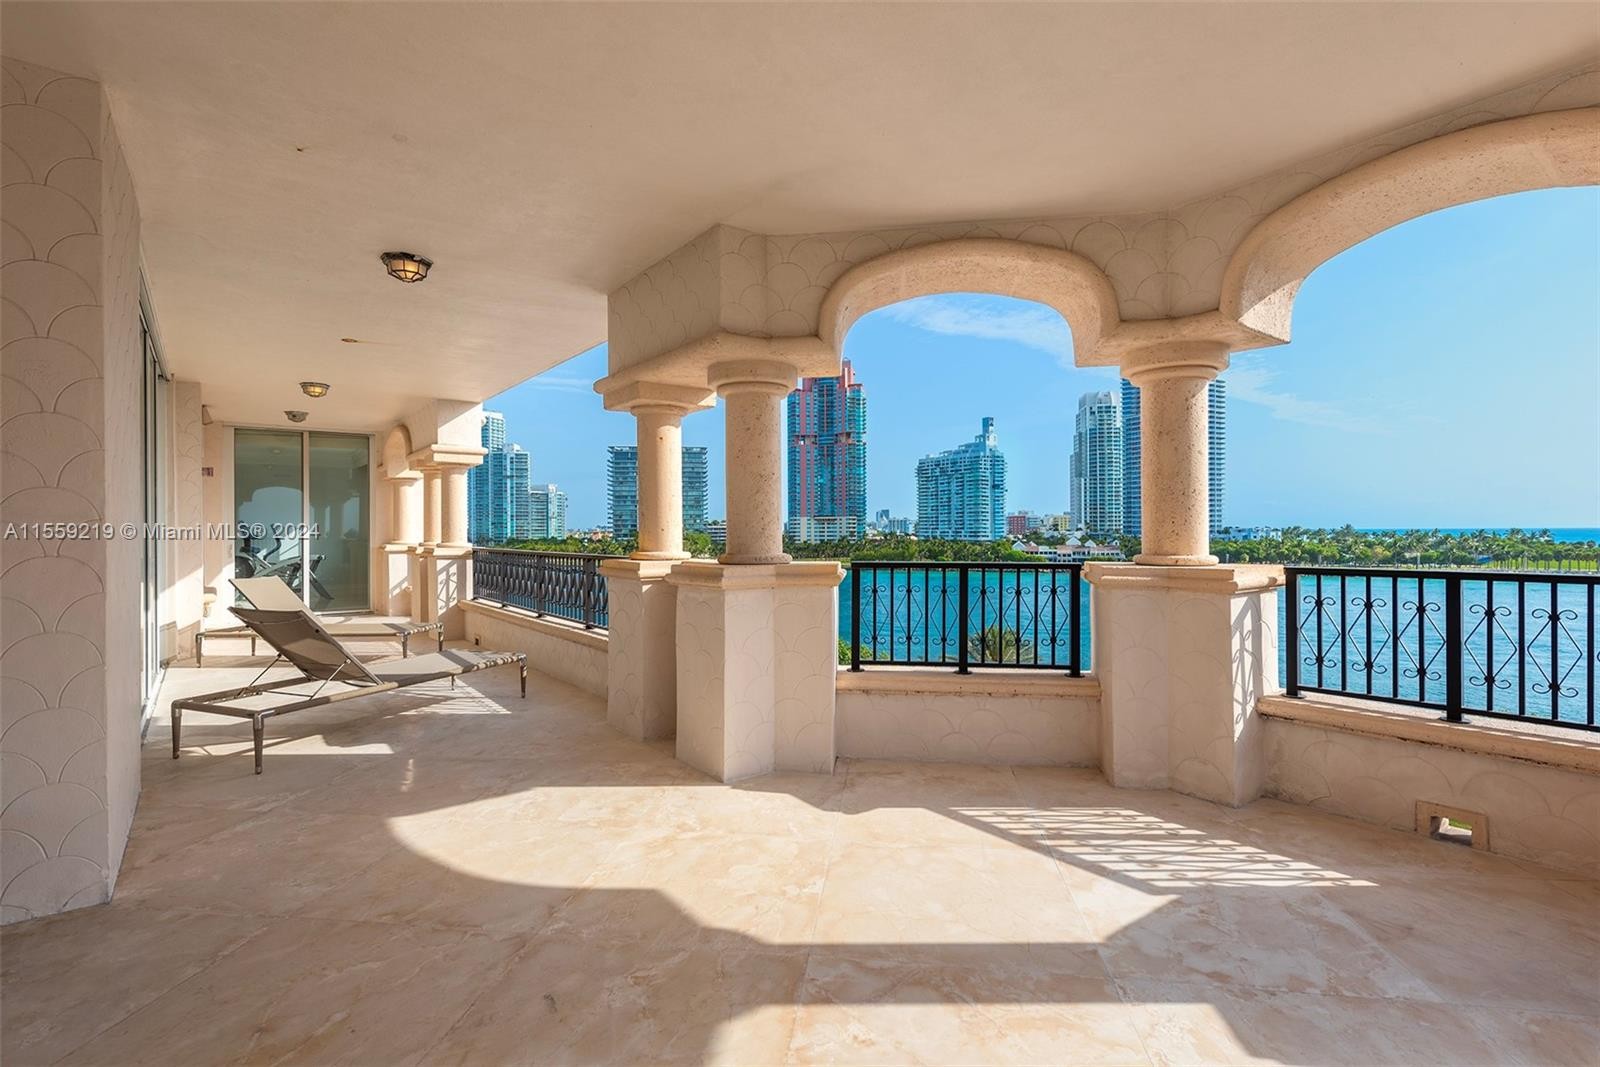 47. Fisher Island Dr